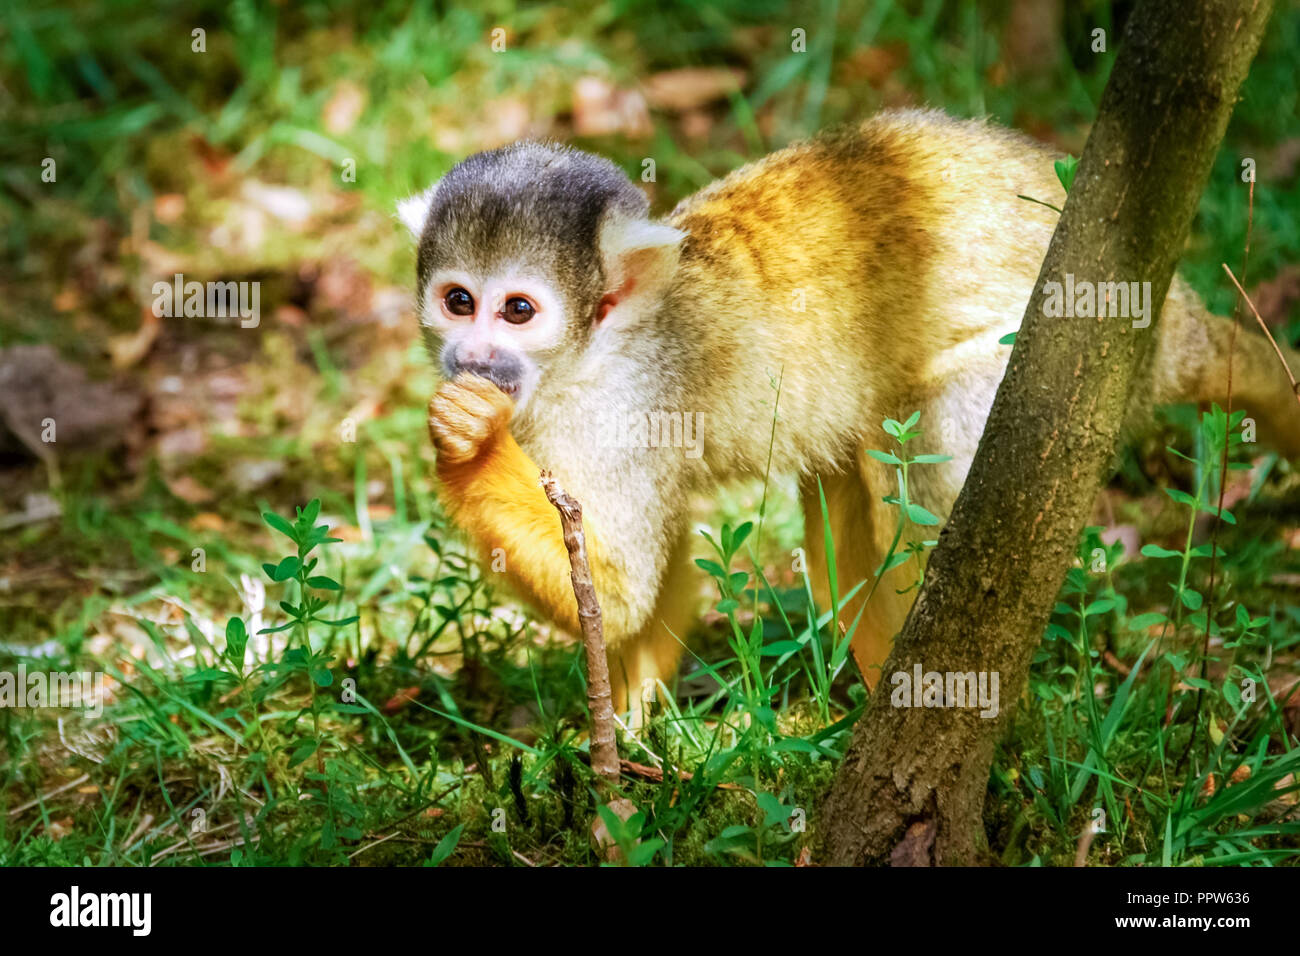 The sun is shining on a small cand urious common squirrel monkey. They live mainly in the tropical forests of Central and South America. Stock Photo